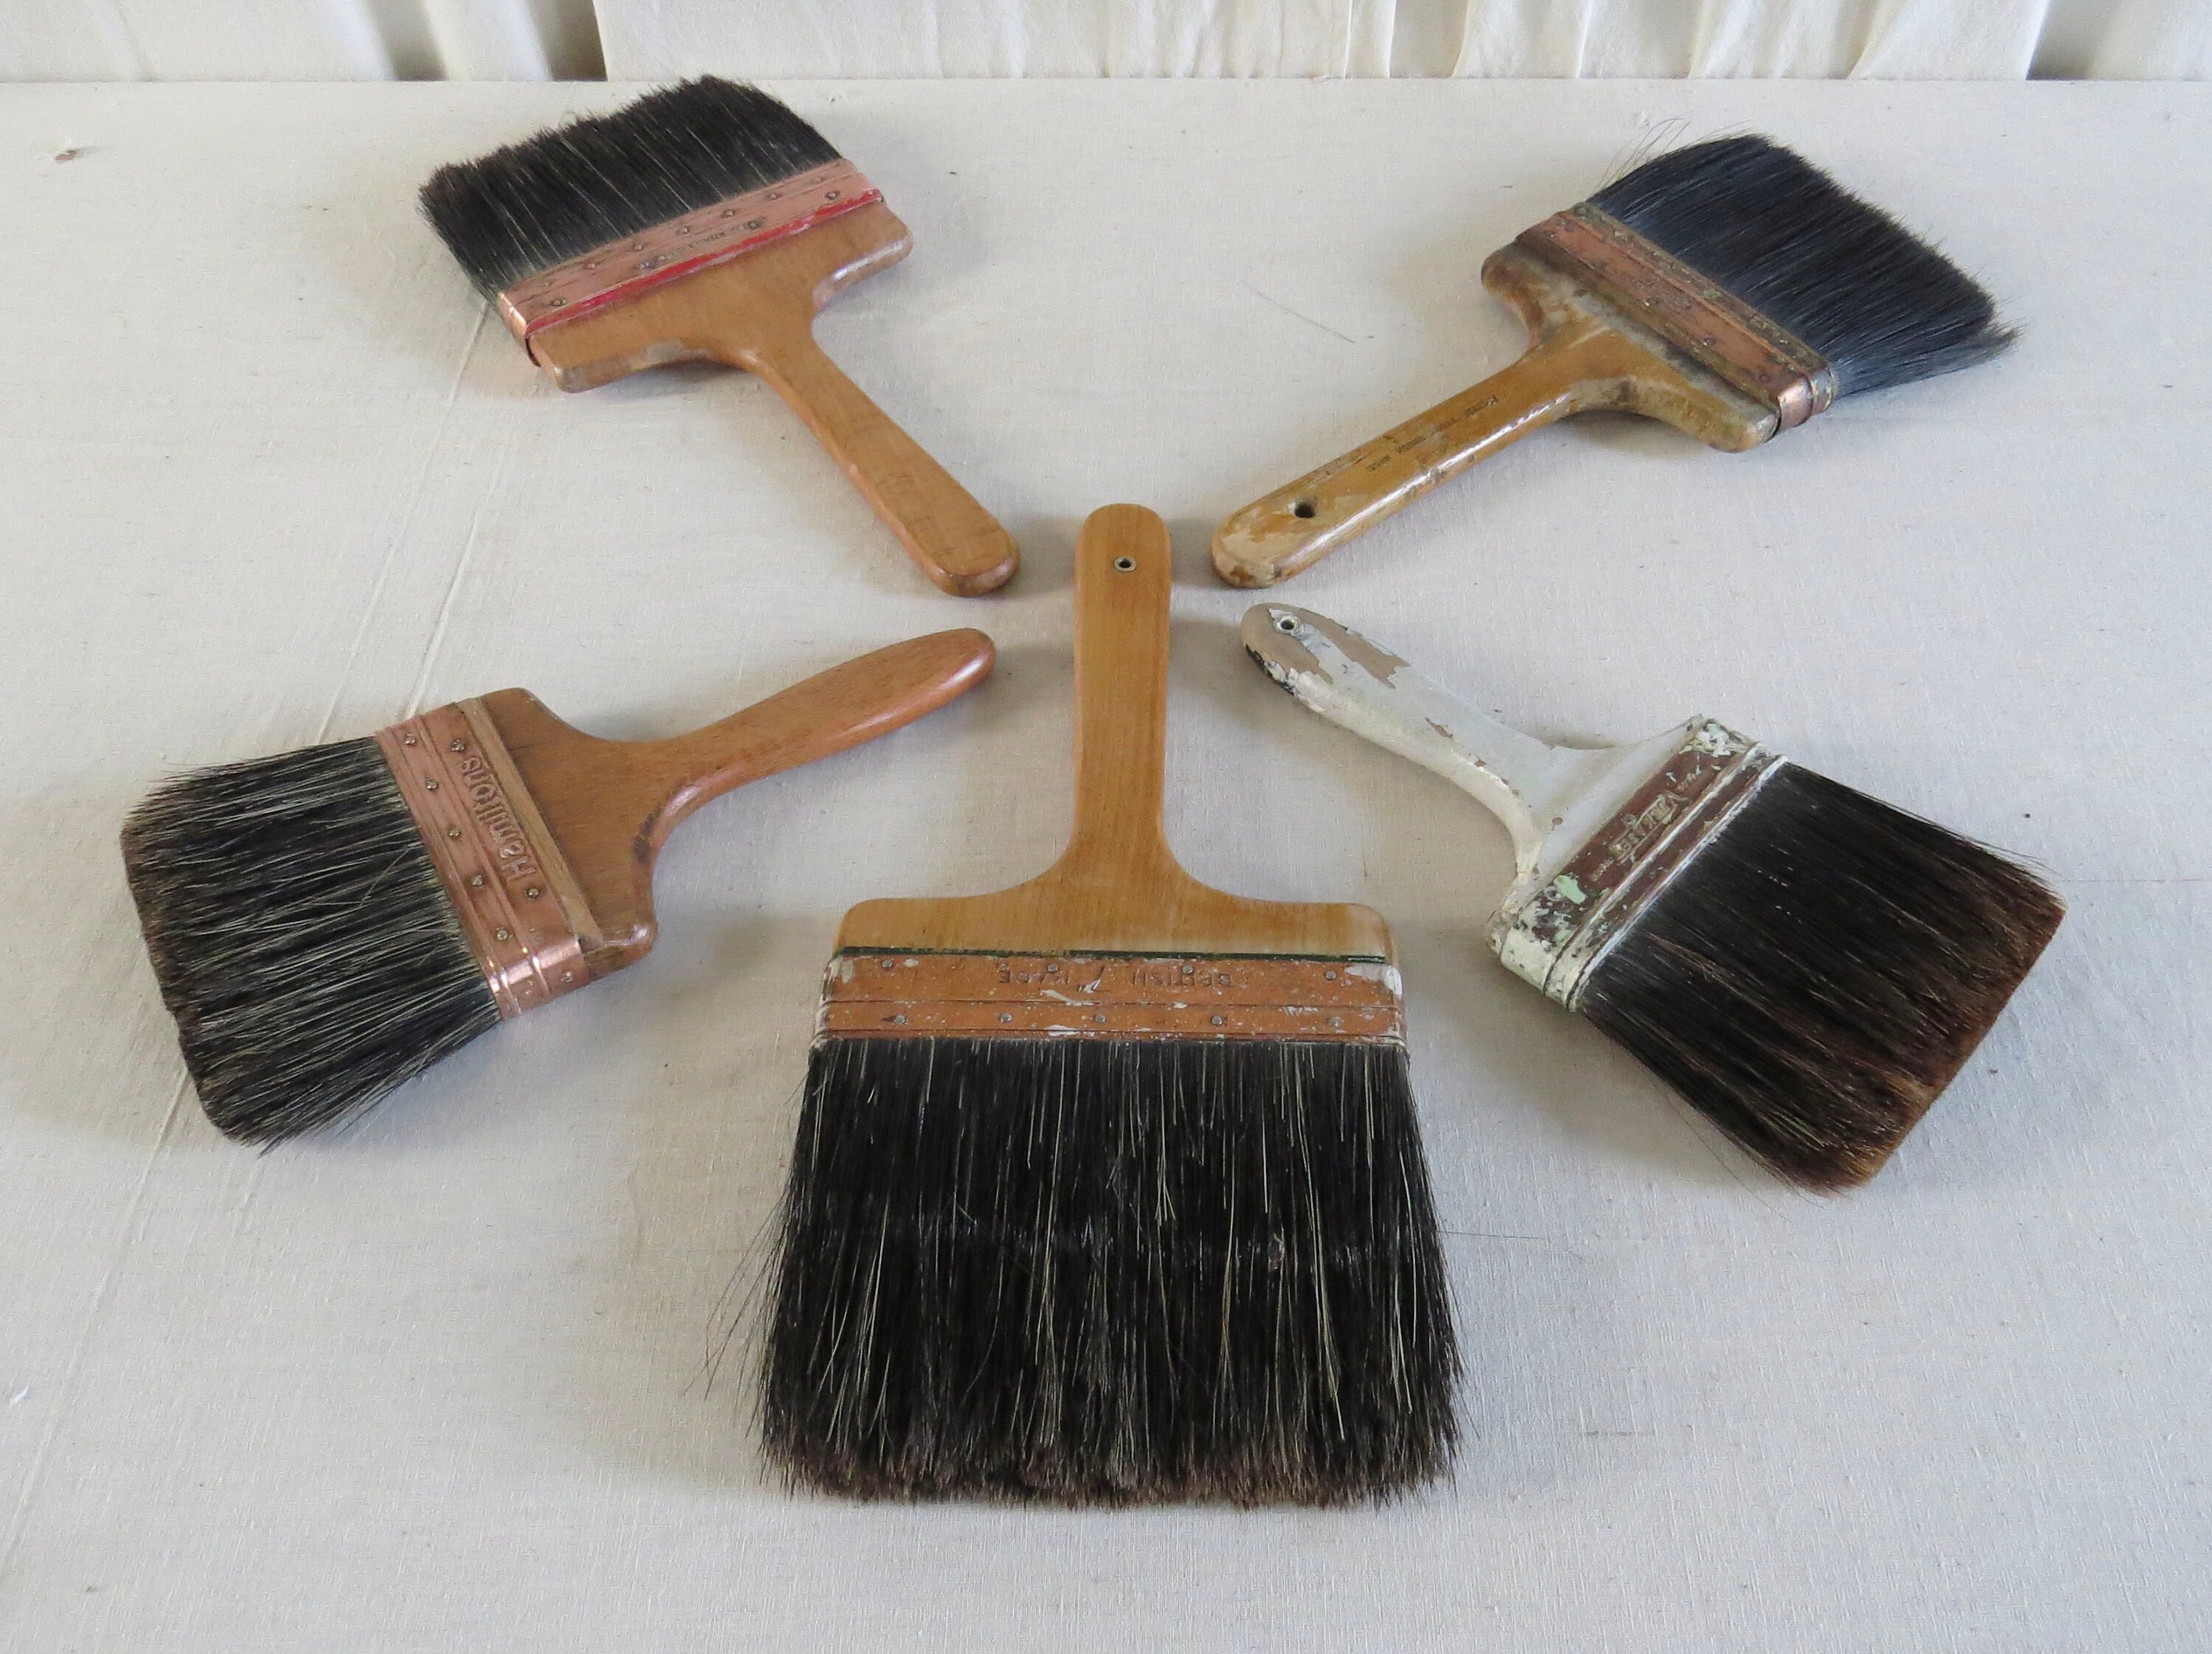 6 Pack of Miniature Detail Paint Brushes 